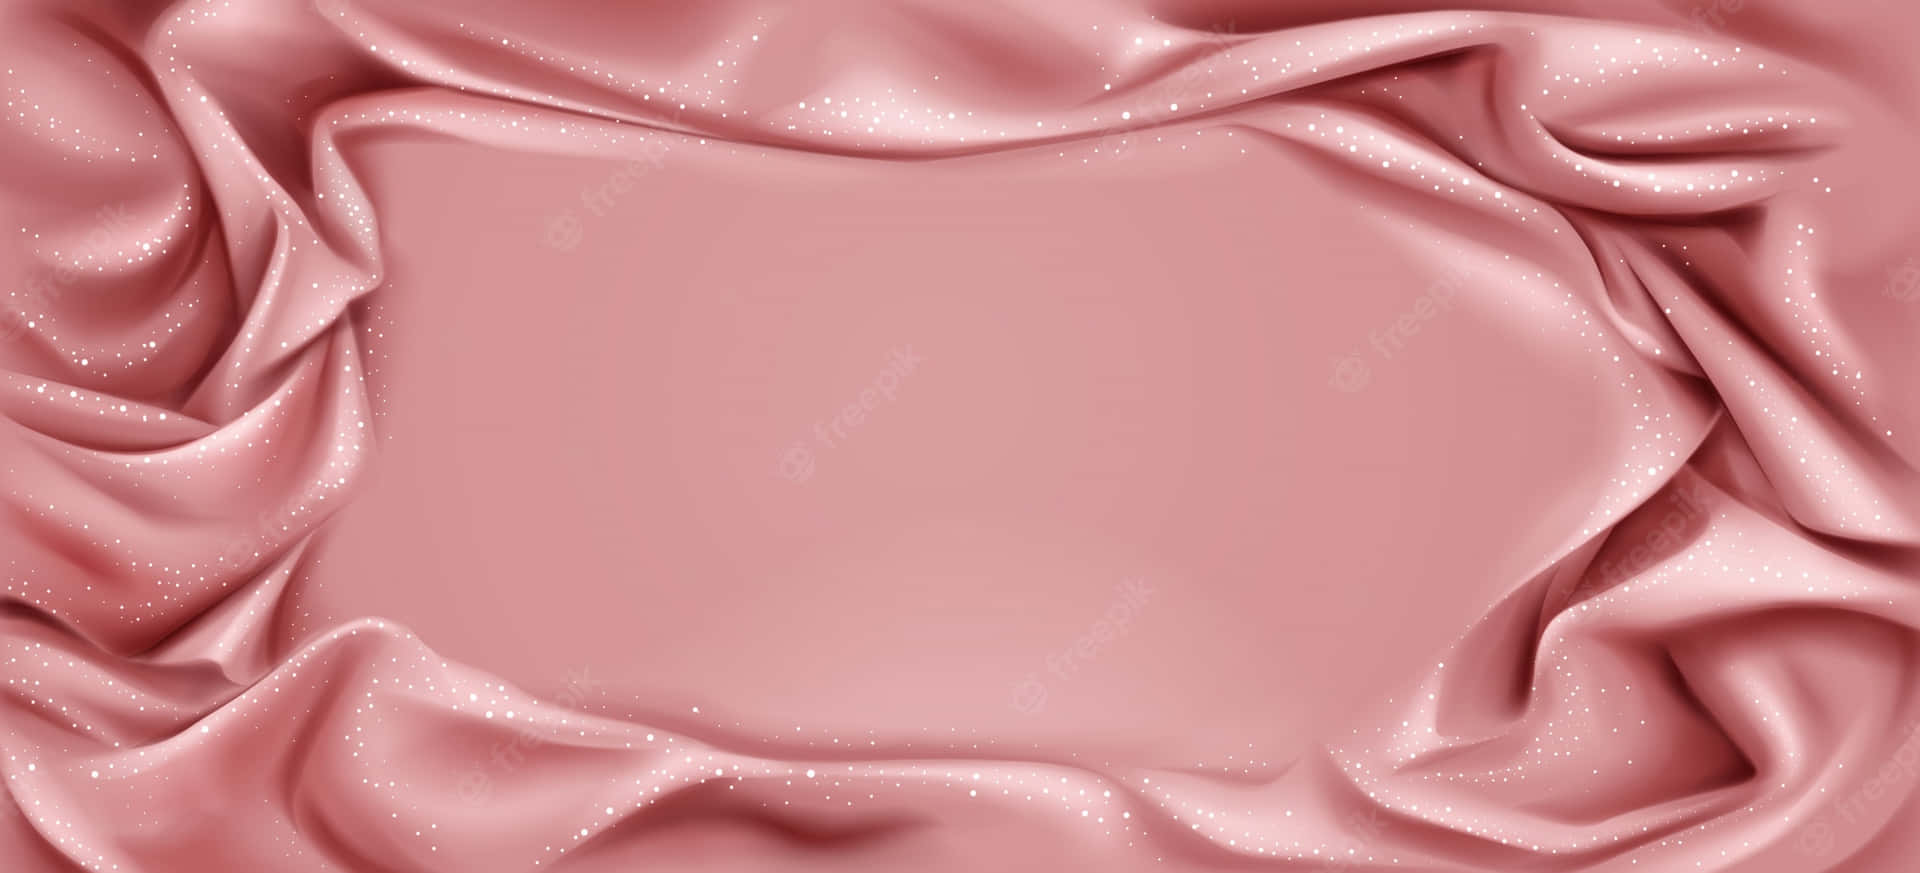 Download Increase Your Beauty With Pink Silk Aesthetic Wallpaper